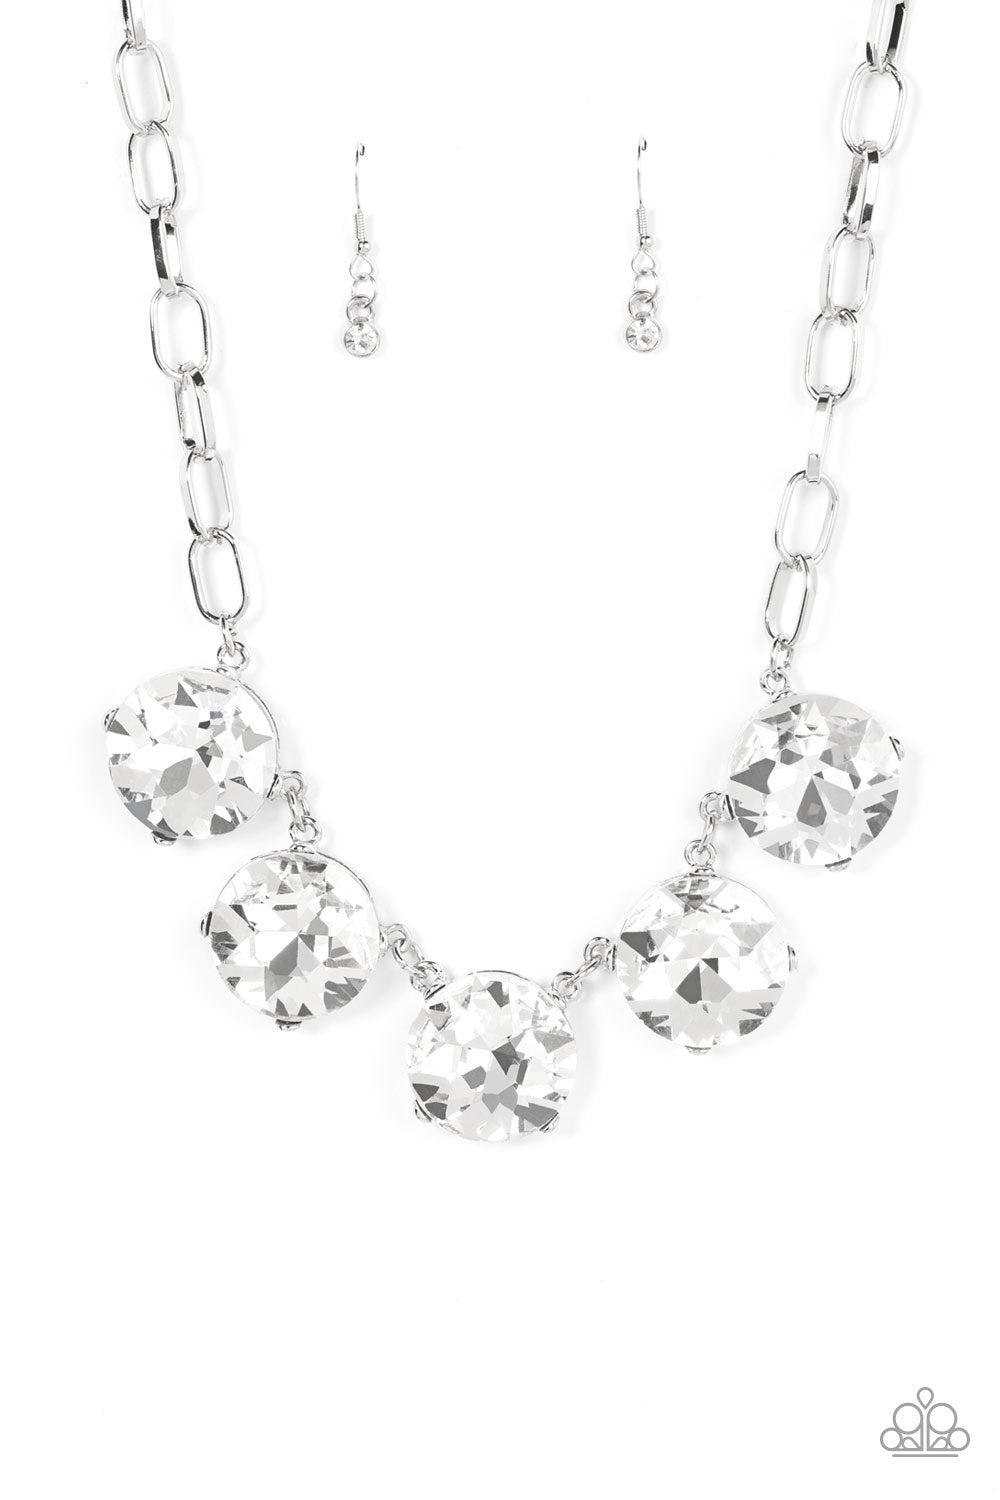 Limelight Luxury White Necklace - Paparazzi Accessories  Set in silver pronged fittings, five dramatically oversized brilliant white rhinestones connect across the collar and attach to an oversized silver chain creating a stunning spot-light loving statement piece. Features an adjustable clasp closure.  Sold as one individual necklace. Includes one pair of matching earrings.